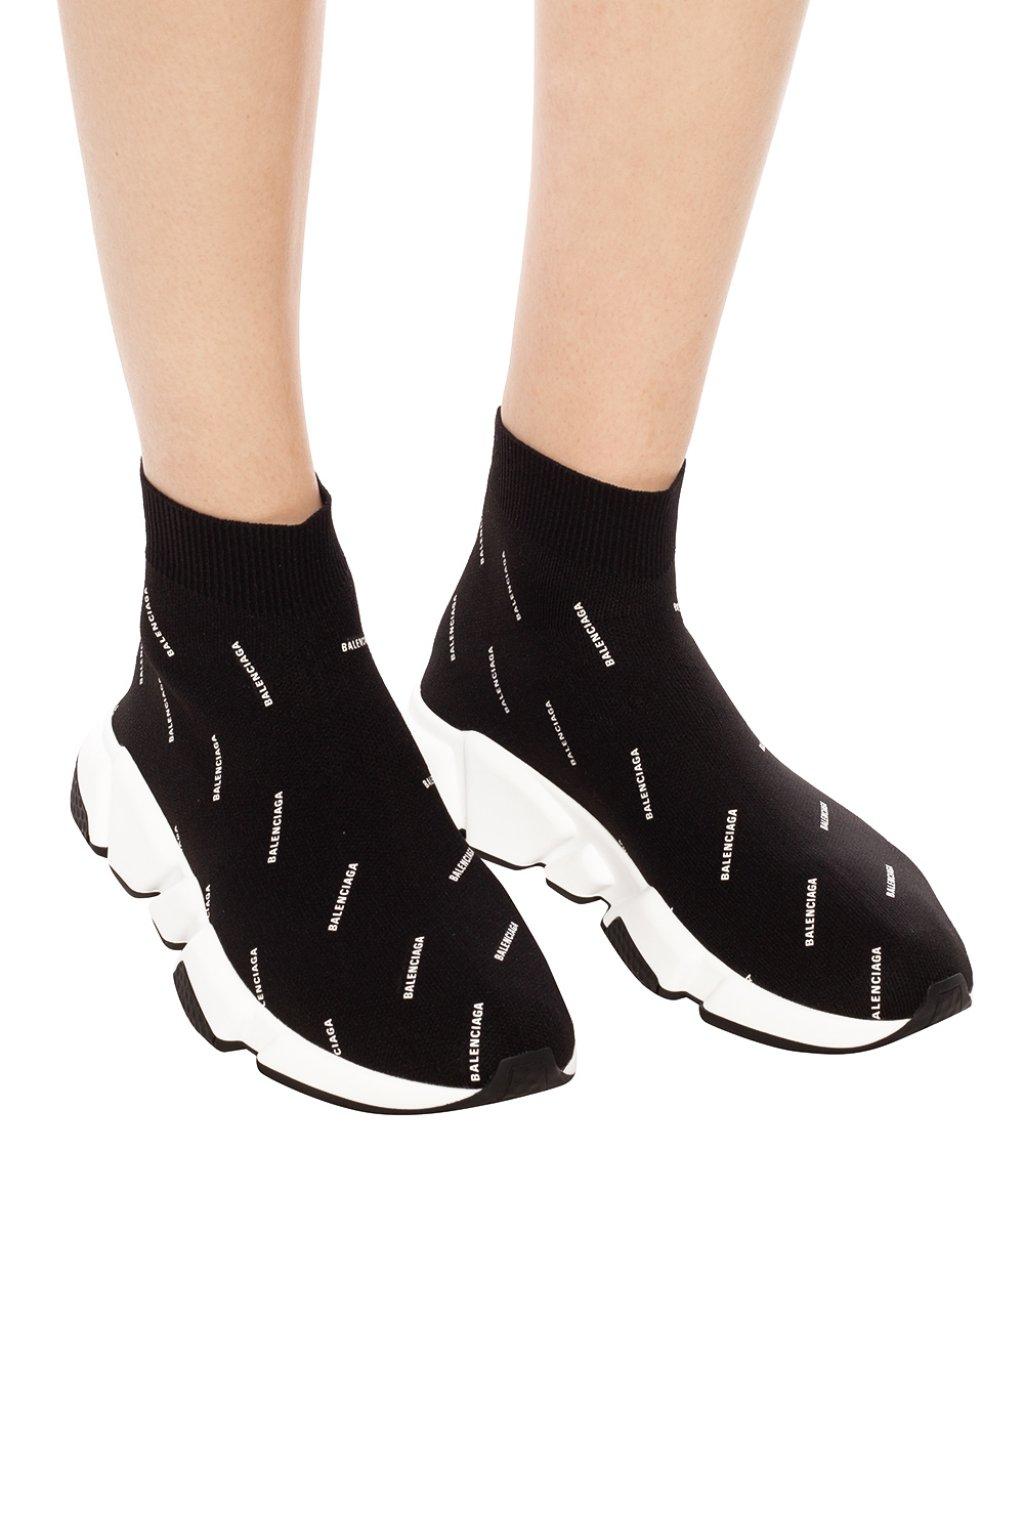 Balenciaga Rubber 'speed' High-top Sock Sneakers in Black for Men - Lyst